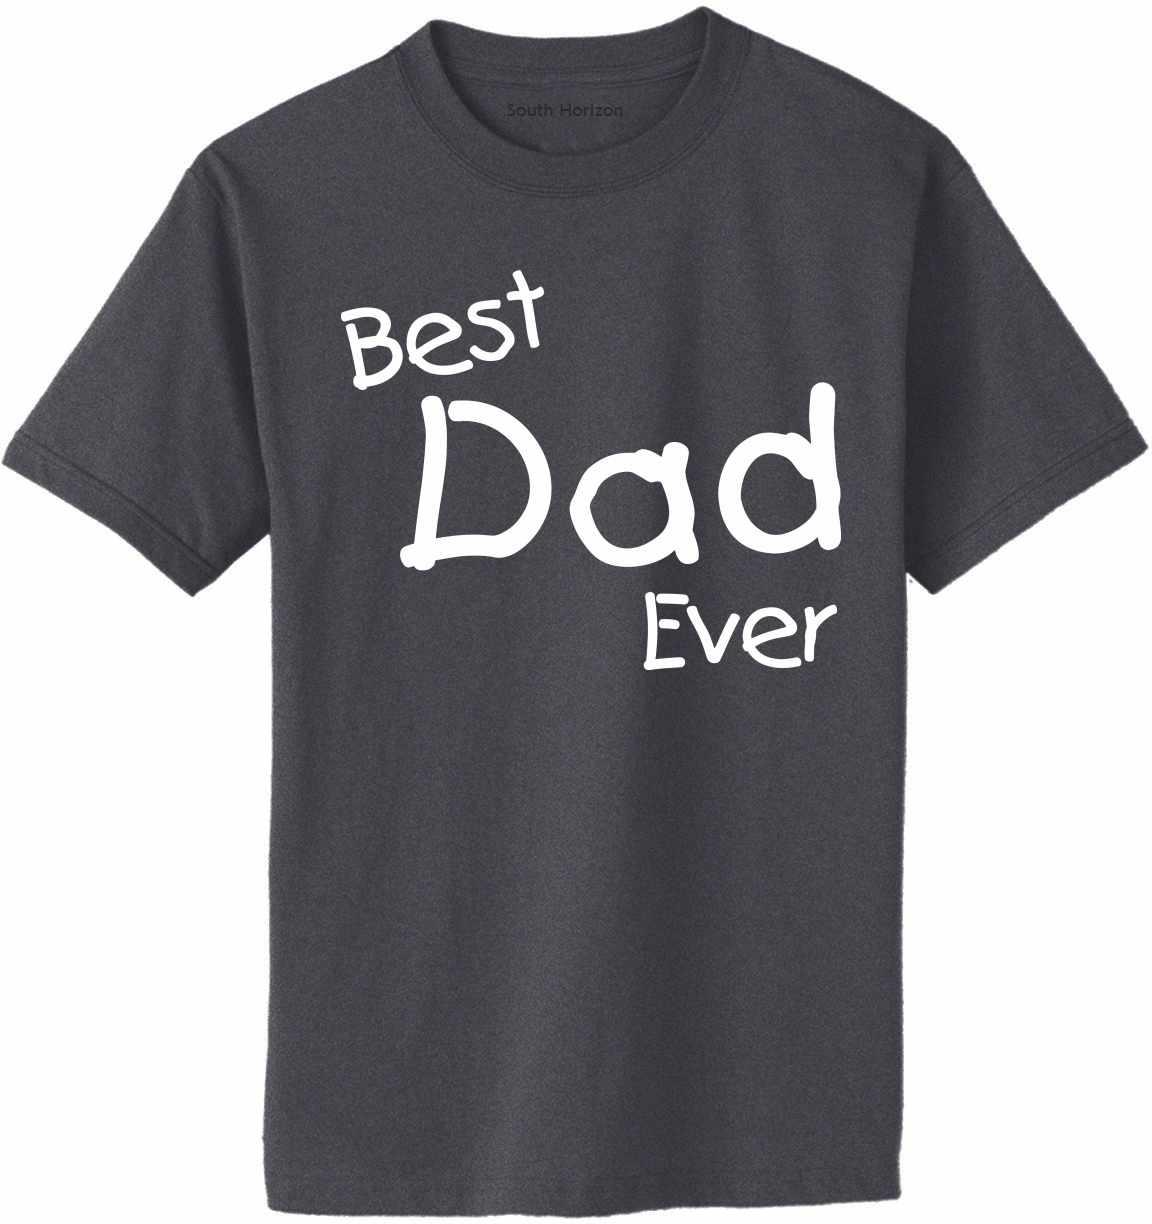 Best Dad Ever Adult T-Shirt (#1087-1)